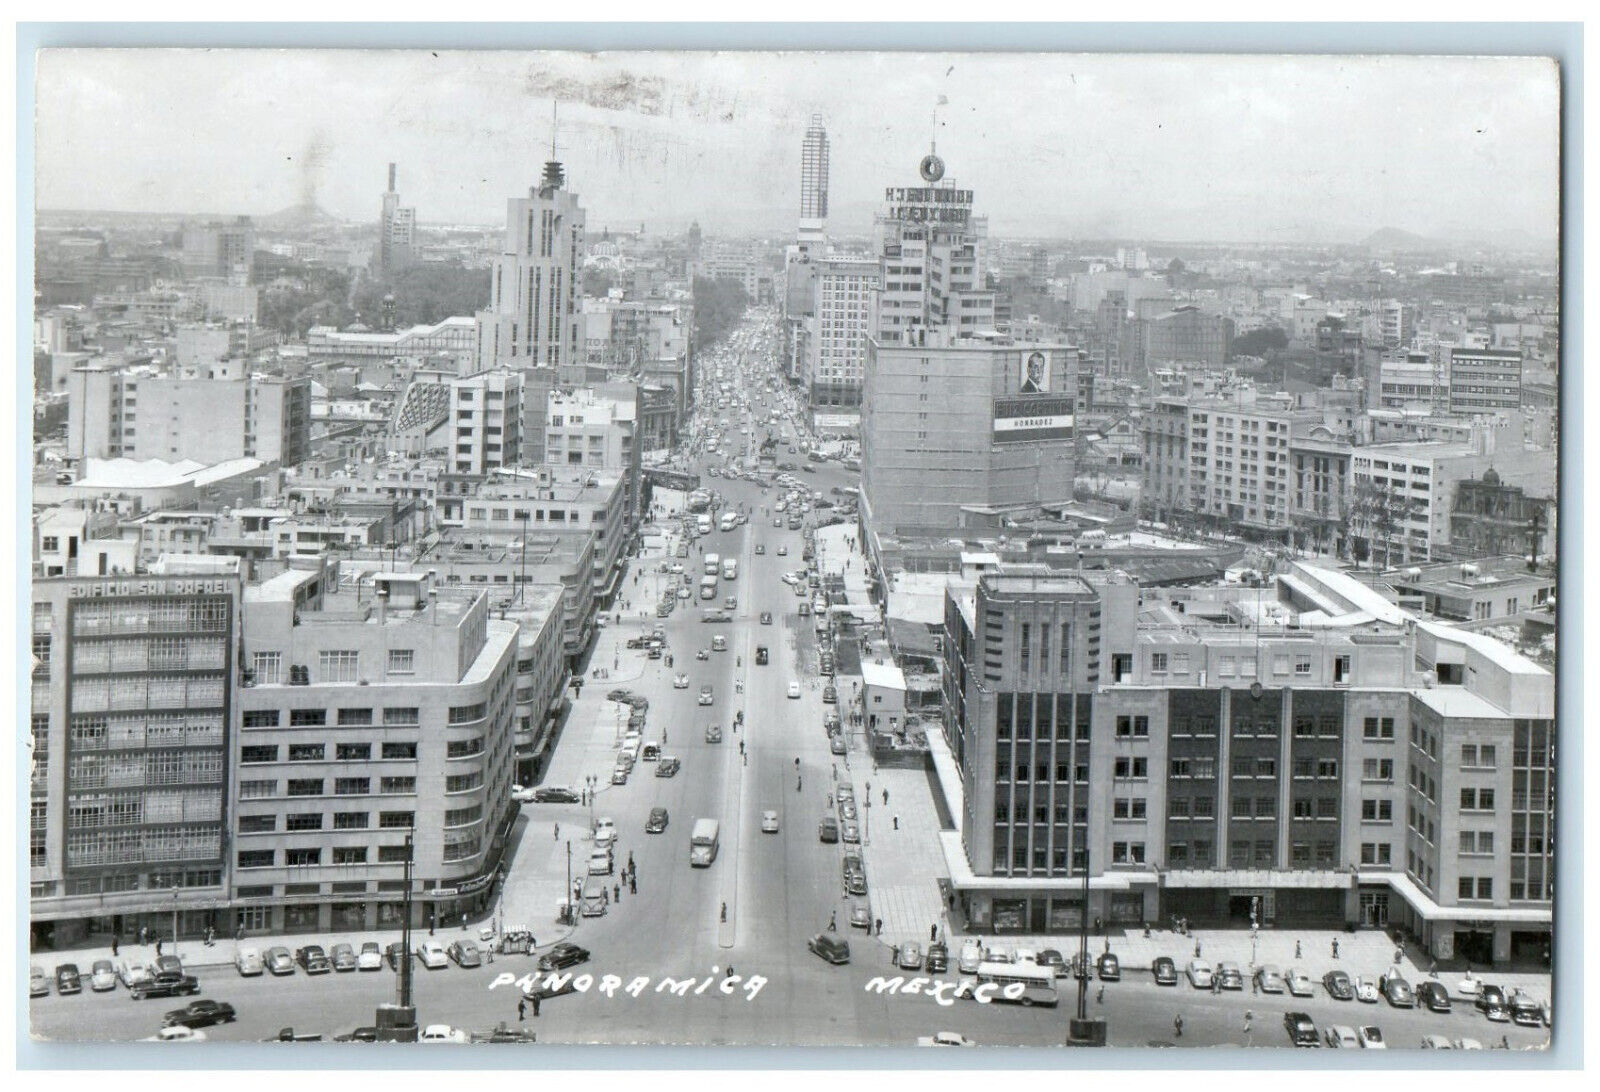 1953 Air View Panoramica Mexico City Mexico Posted Vintage RPPC Photo Postcard